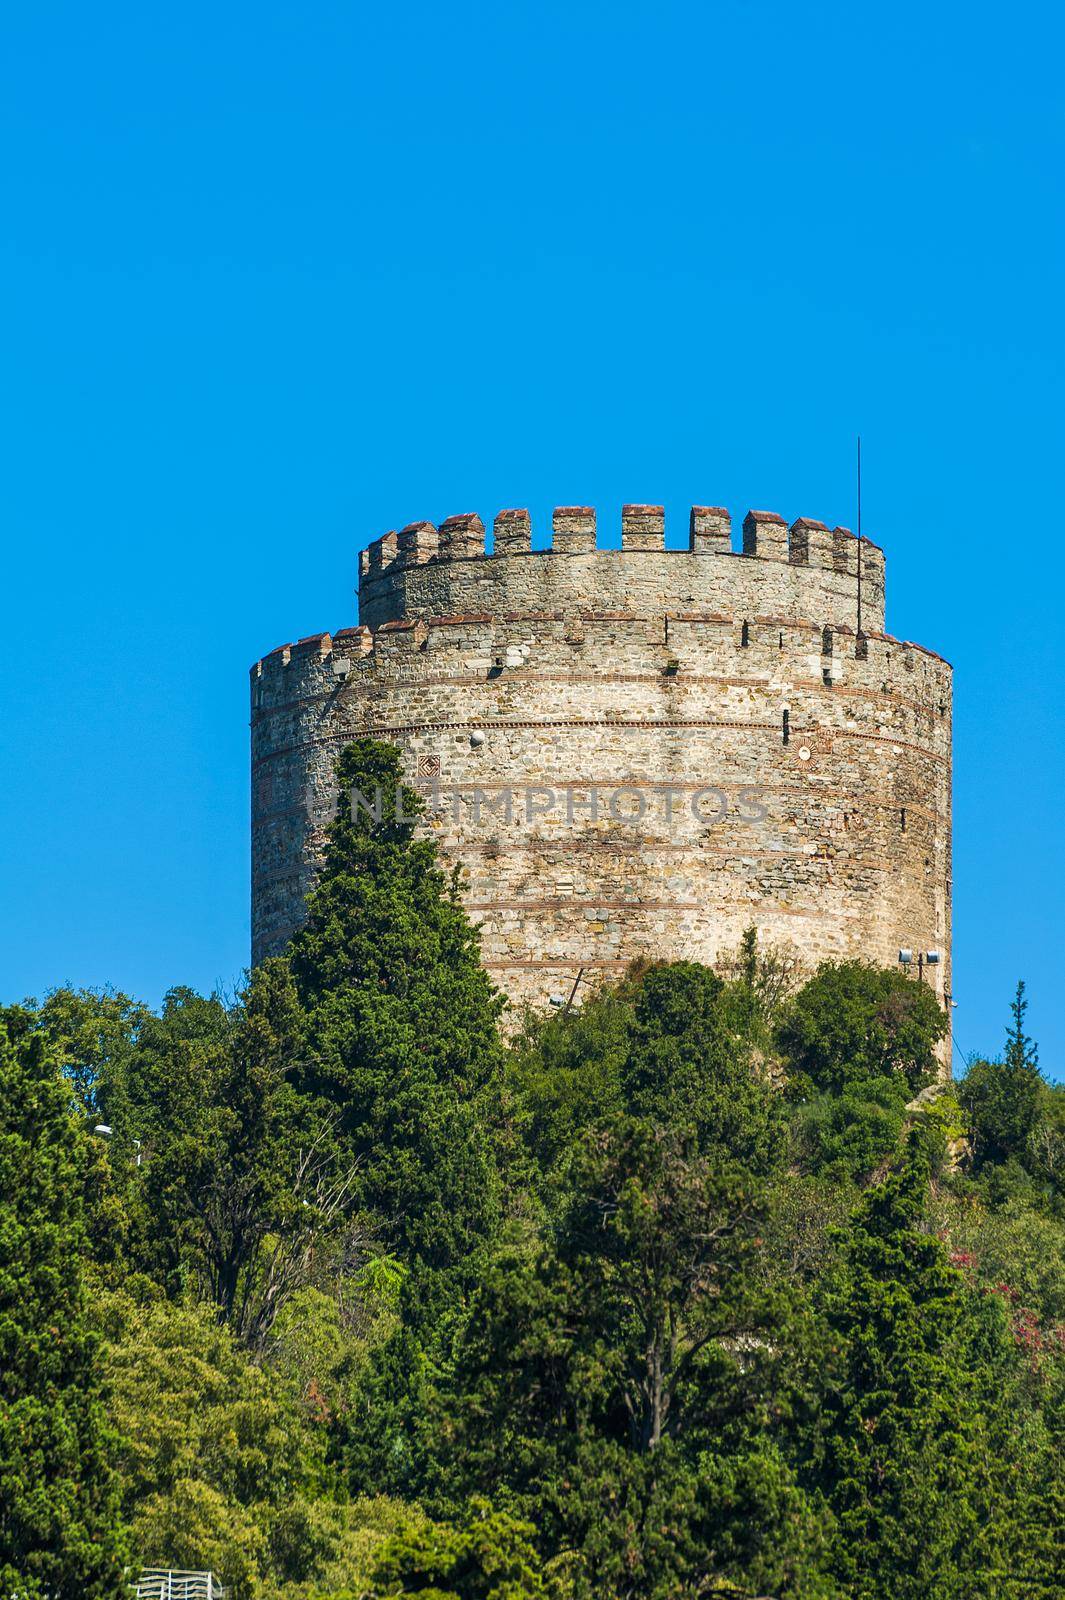 Tower of ancient medieval castle Rumeli Hisari built on a hill above a Bosphorus in Istanbul in Turkey. The fortress was constructed by Ottoman Turks in 15th century before the siege of Byzantine capital Constantinople